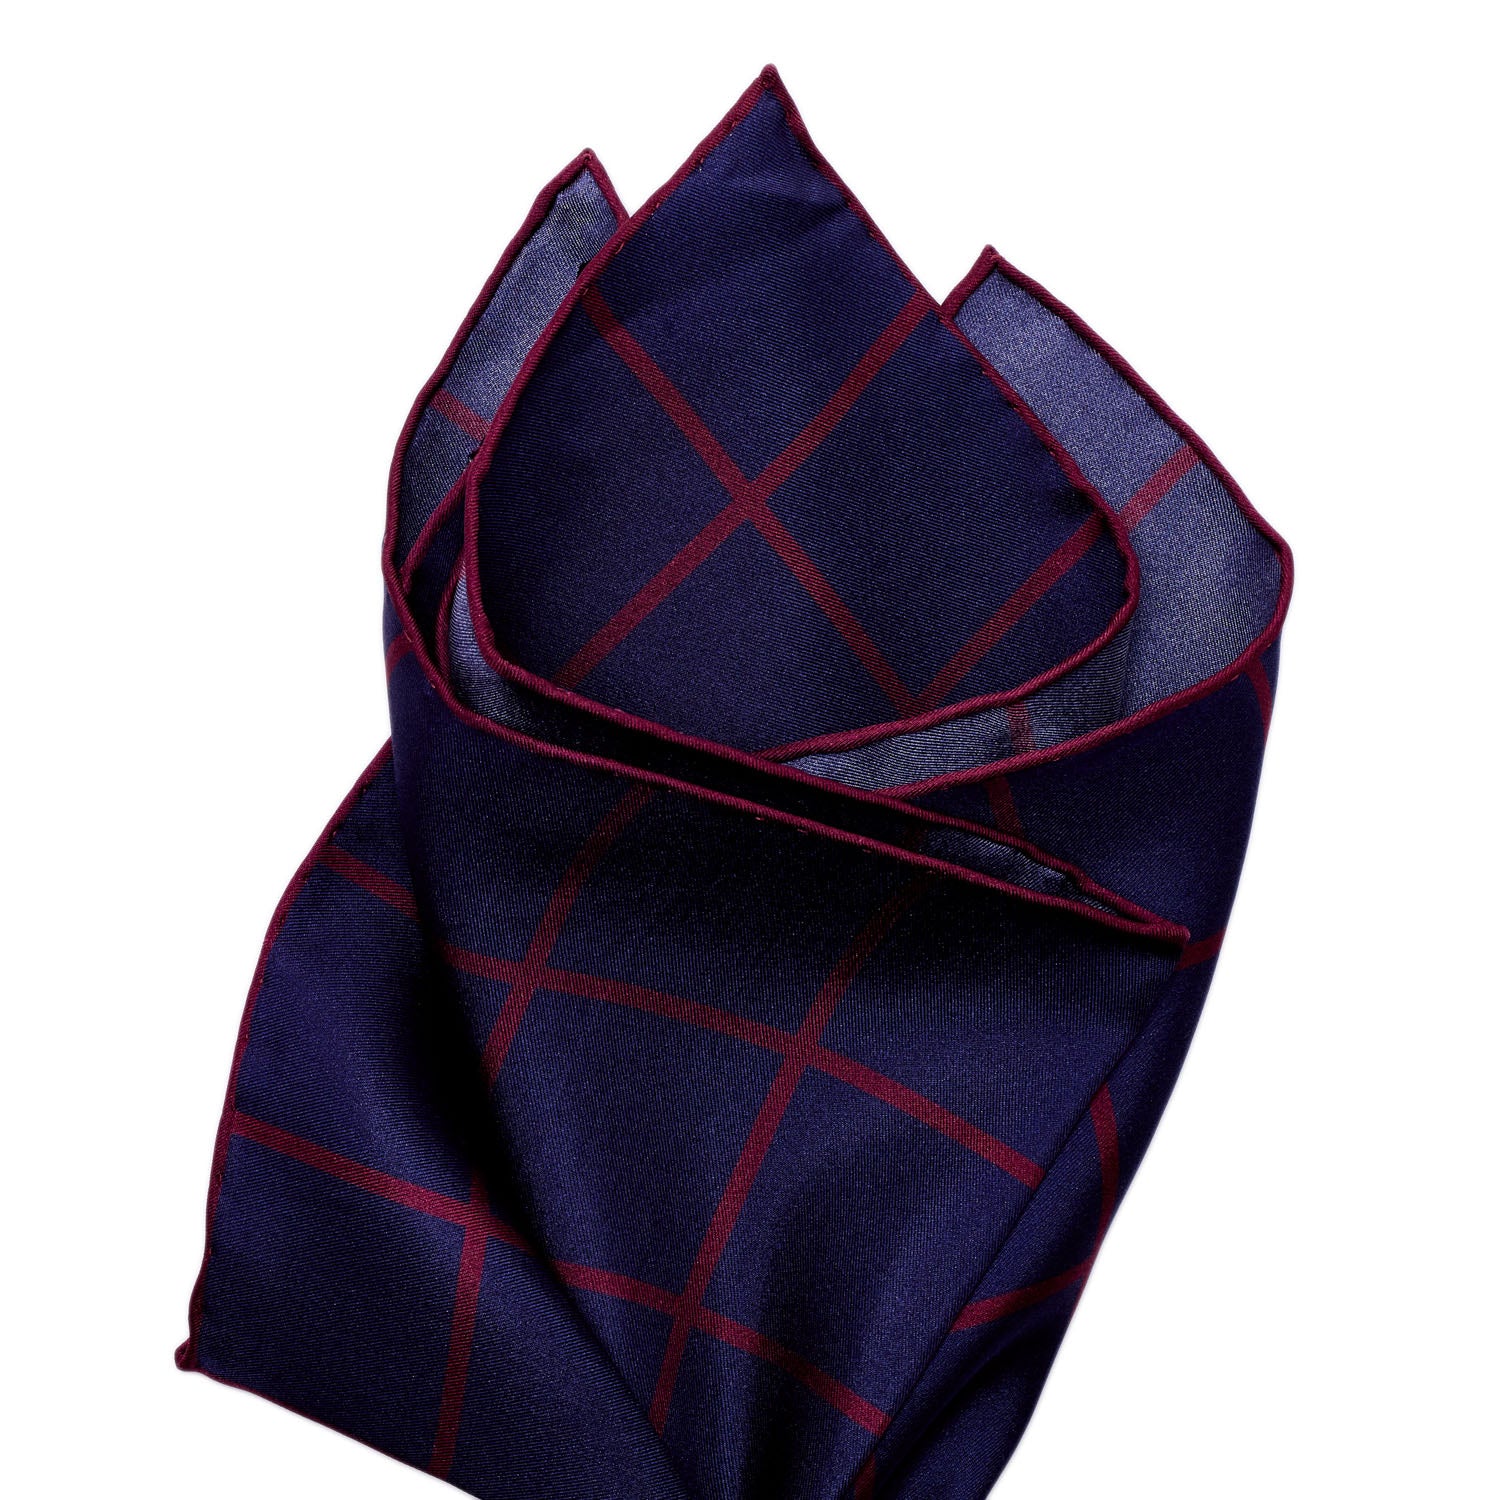 A Sovereign Grade Prince of Wales Pocket Square in Navy/Burgundy, by KirbyAllison.com, featuring a blue and red plaid pattern on a white background.